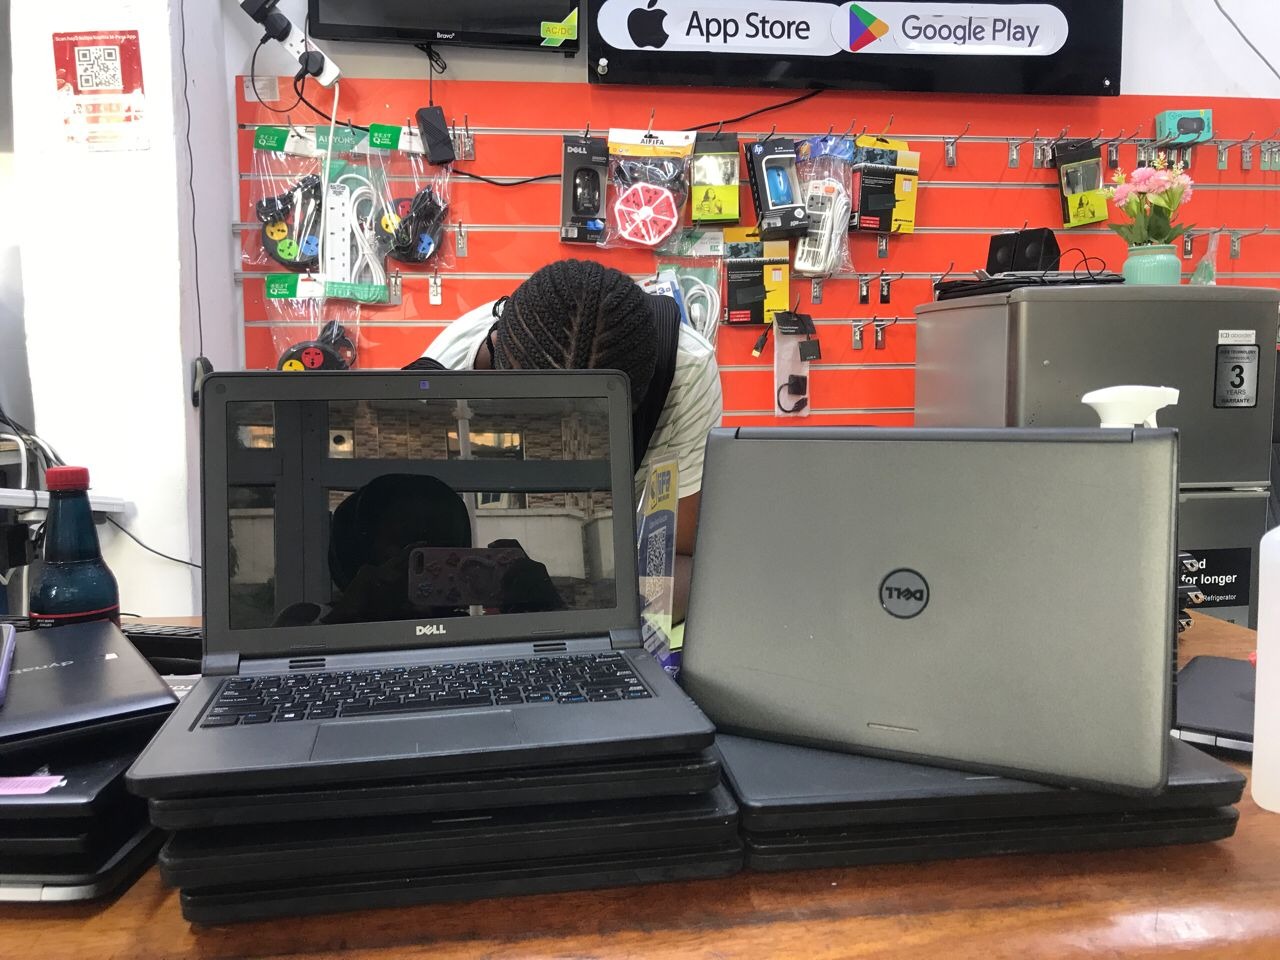 Dell Latitude 3150 Intel Ram4Gb Disk 500 Touch Screen Inch 12' Speed(Cpu) 1.80Ghz Battery 3Hours Charge. 